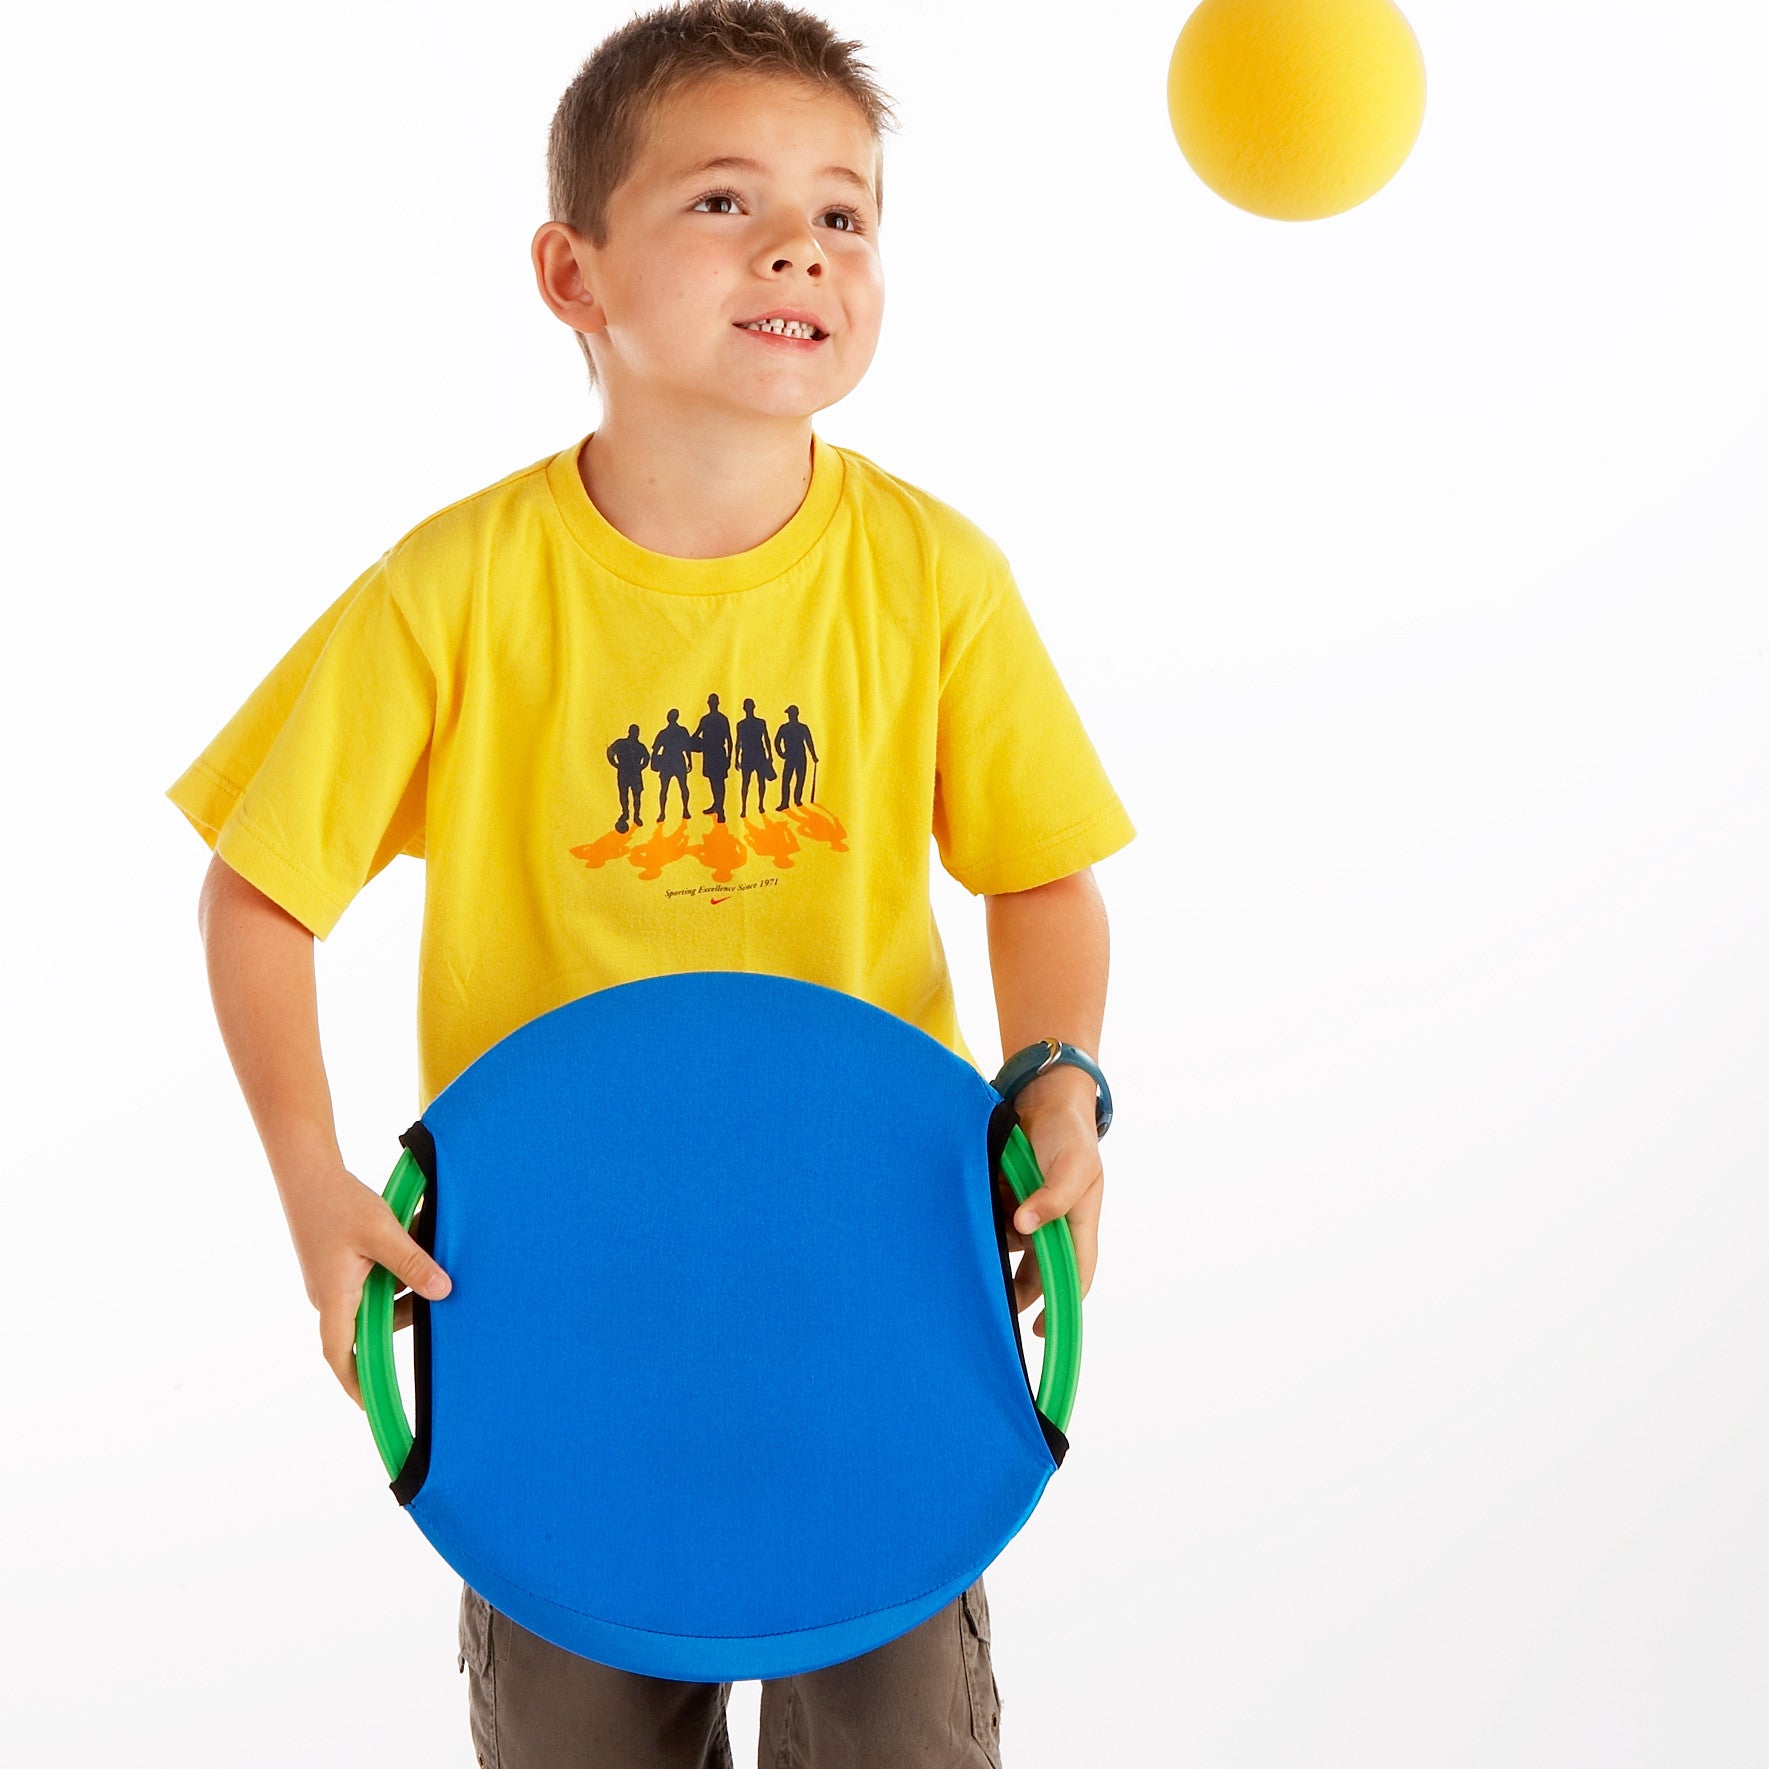 Early Years Coaching Aid. The reverse of the Easy Catch Happy Face is smooth and more challenging. Here, Owen shows how to volley using a sponge ball.